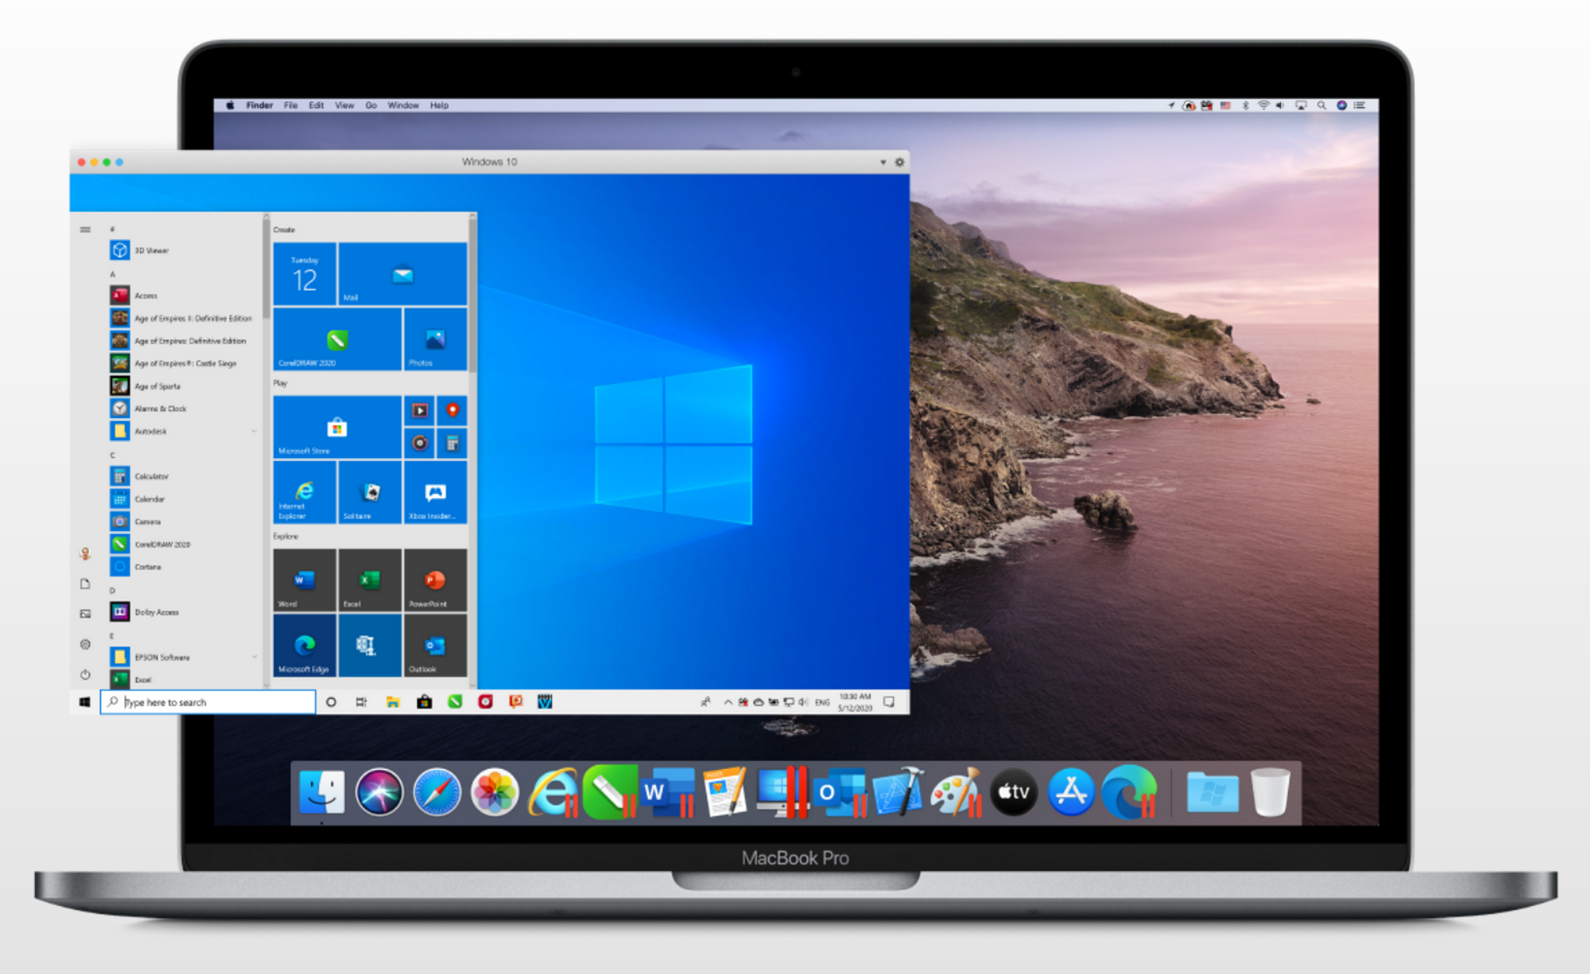 parallels for mac 8 windows 10